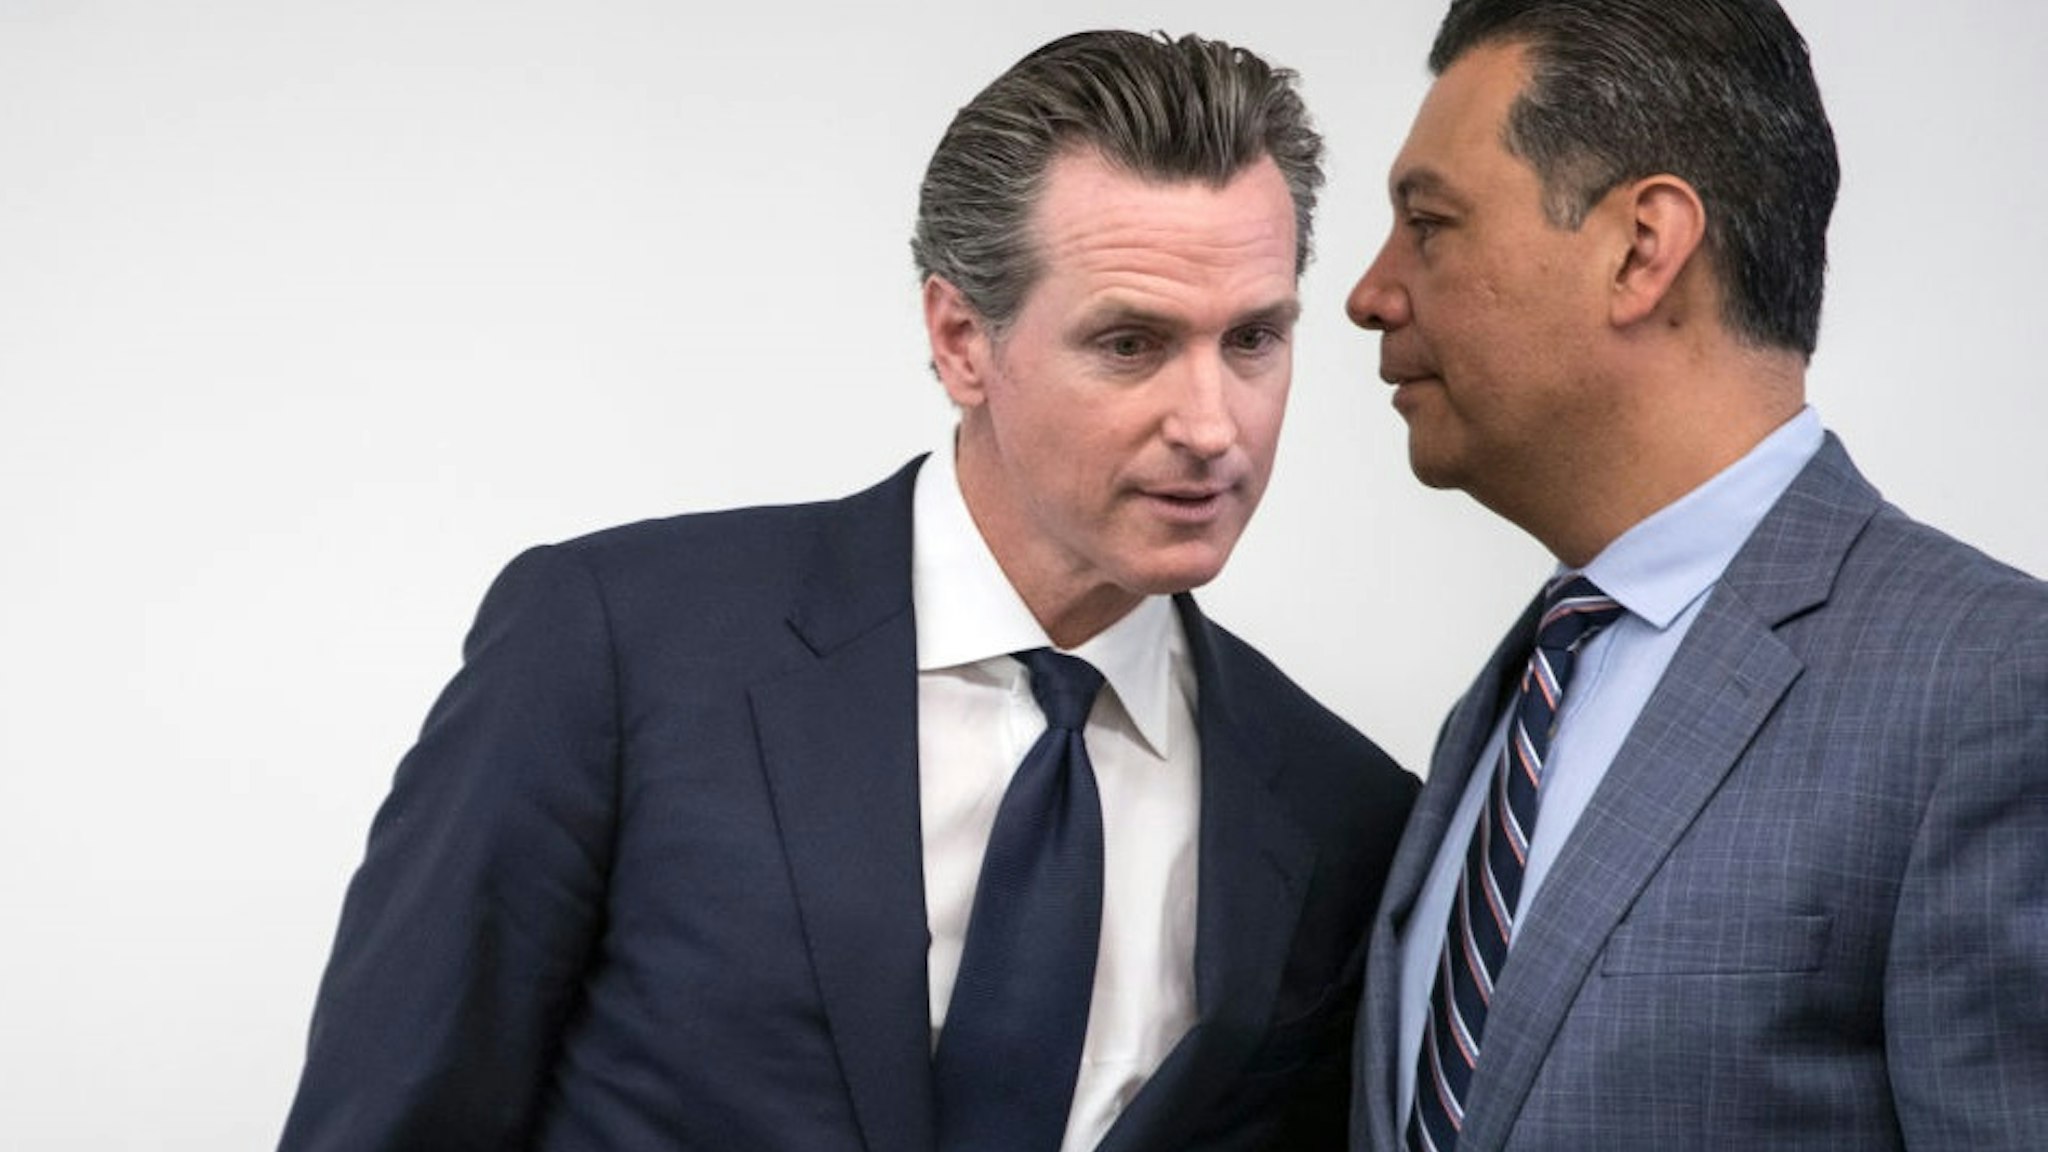 LOS ANGELES, CA -- THURSDAY, OCTOBER 26: Secretary of State Alex Padilla, right, endorses California Lt. Governor Gavin Newsom, left, in the governor's race during an event at the Laborers' International Union of North America Local 300 hall in Los Angeles, CA, on Oct. 26, 2017.